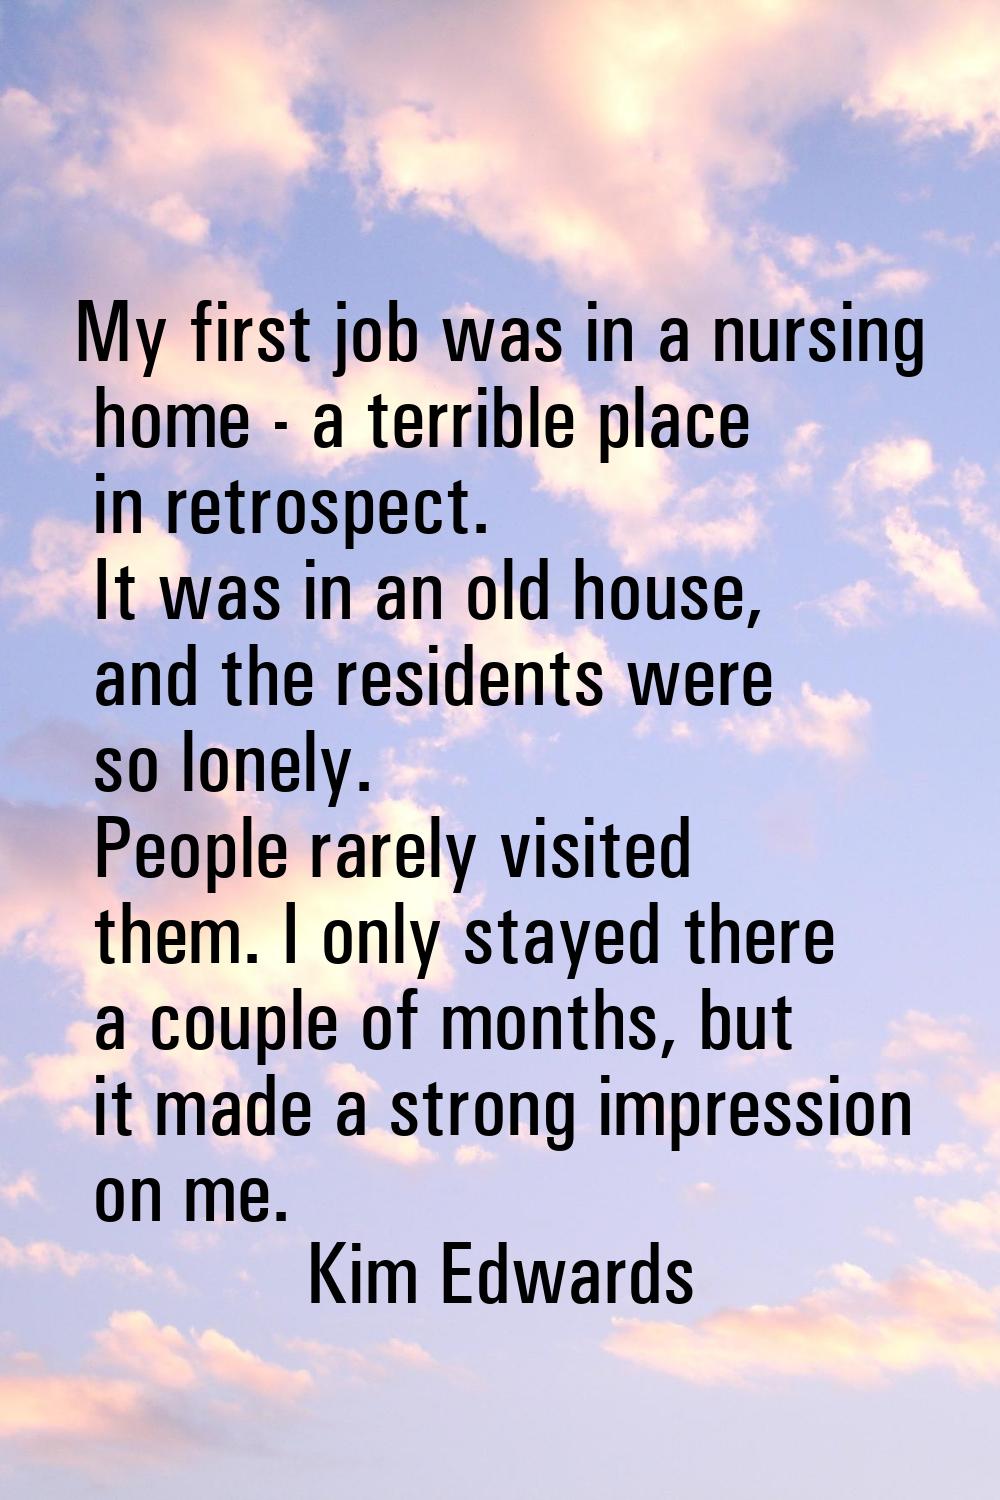 My first job was in a nursing home - a terrible place in retrospect. It was in an old house, and th